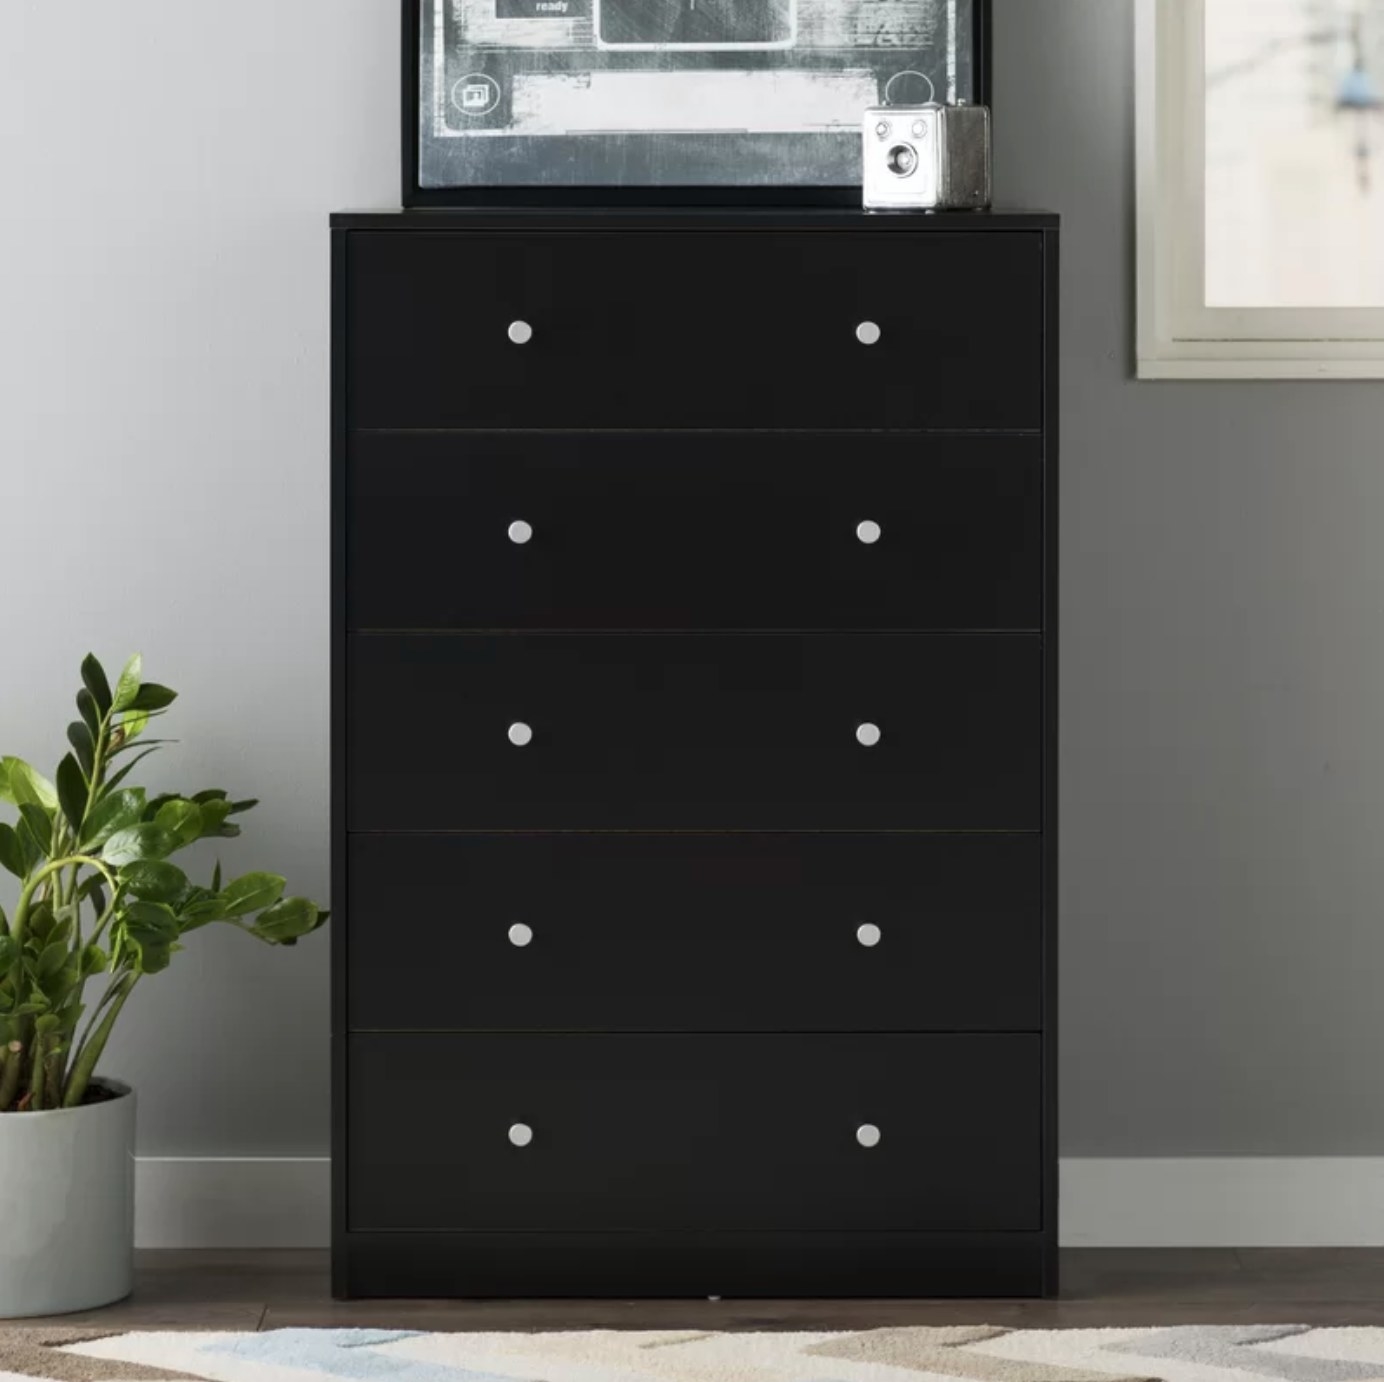 The five drawer chest in black